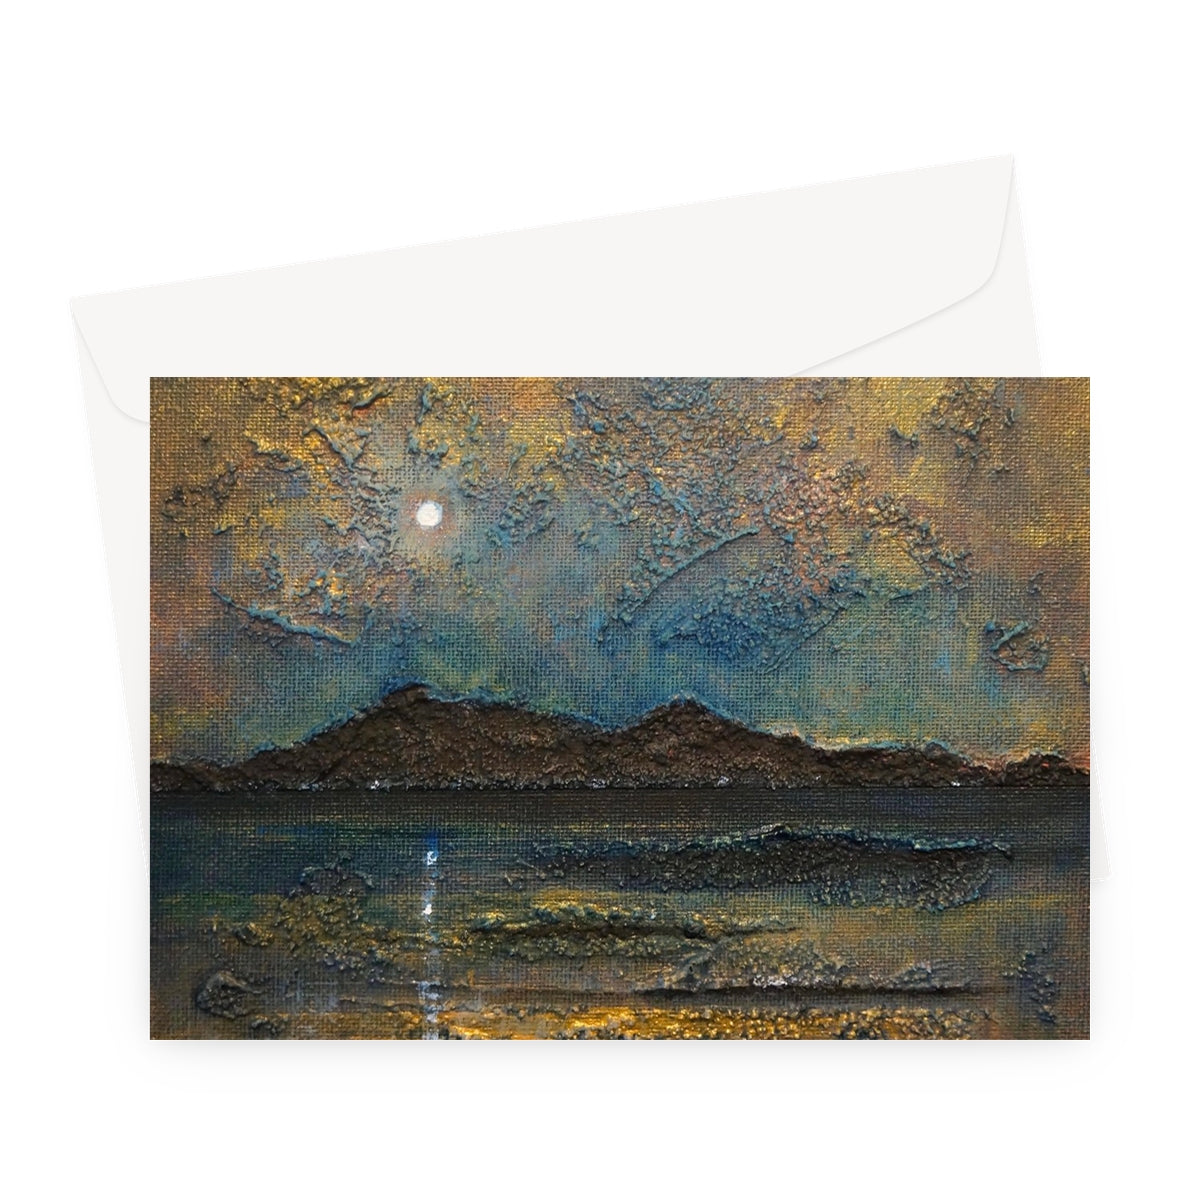 Arran Moonlight Art Gifts Greeting Card-Greetings Cards-Arran Art Gallery-A5 Landscape-1 Card-Paintings, Prints, Homeware, Art Gifts From Scotland By Scottish Artist Kevin Hunter